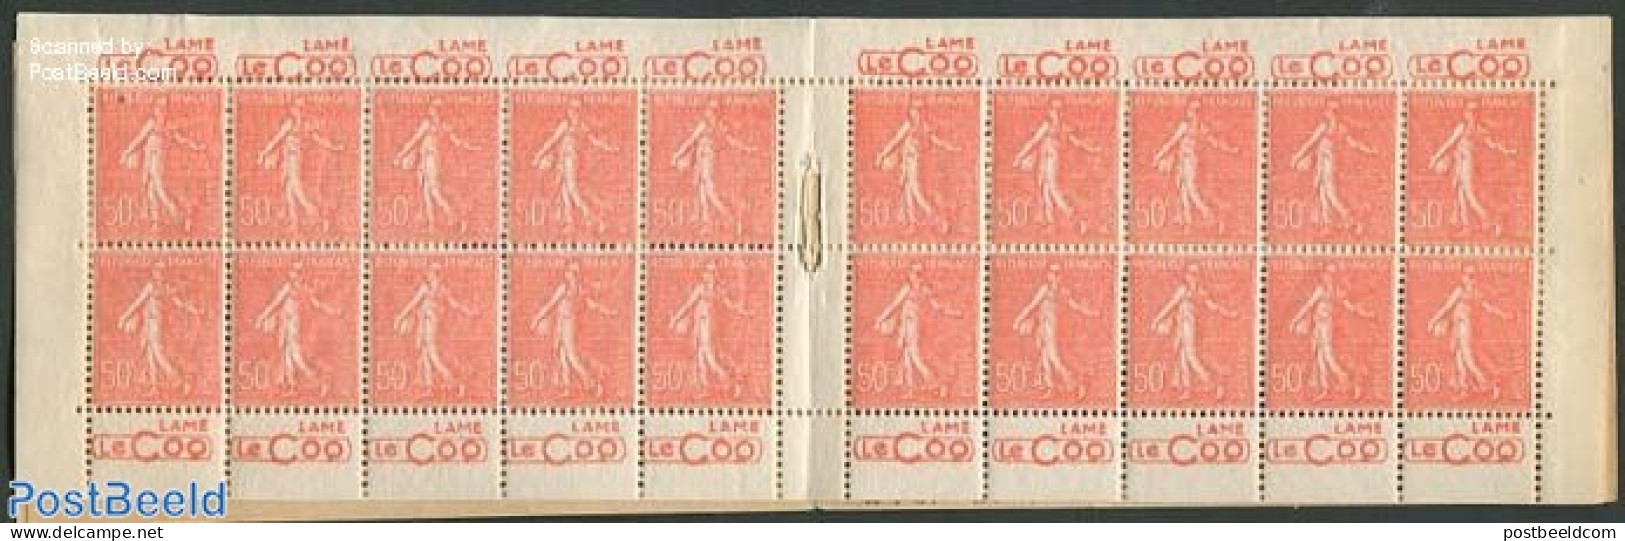 France 1924 20x50c Booklet (Lame Le Coq 4x), Mint NH, Stamp Booklets - Ongebruikt